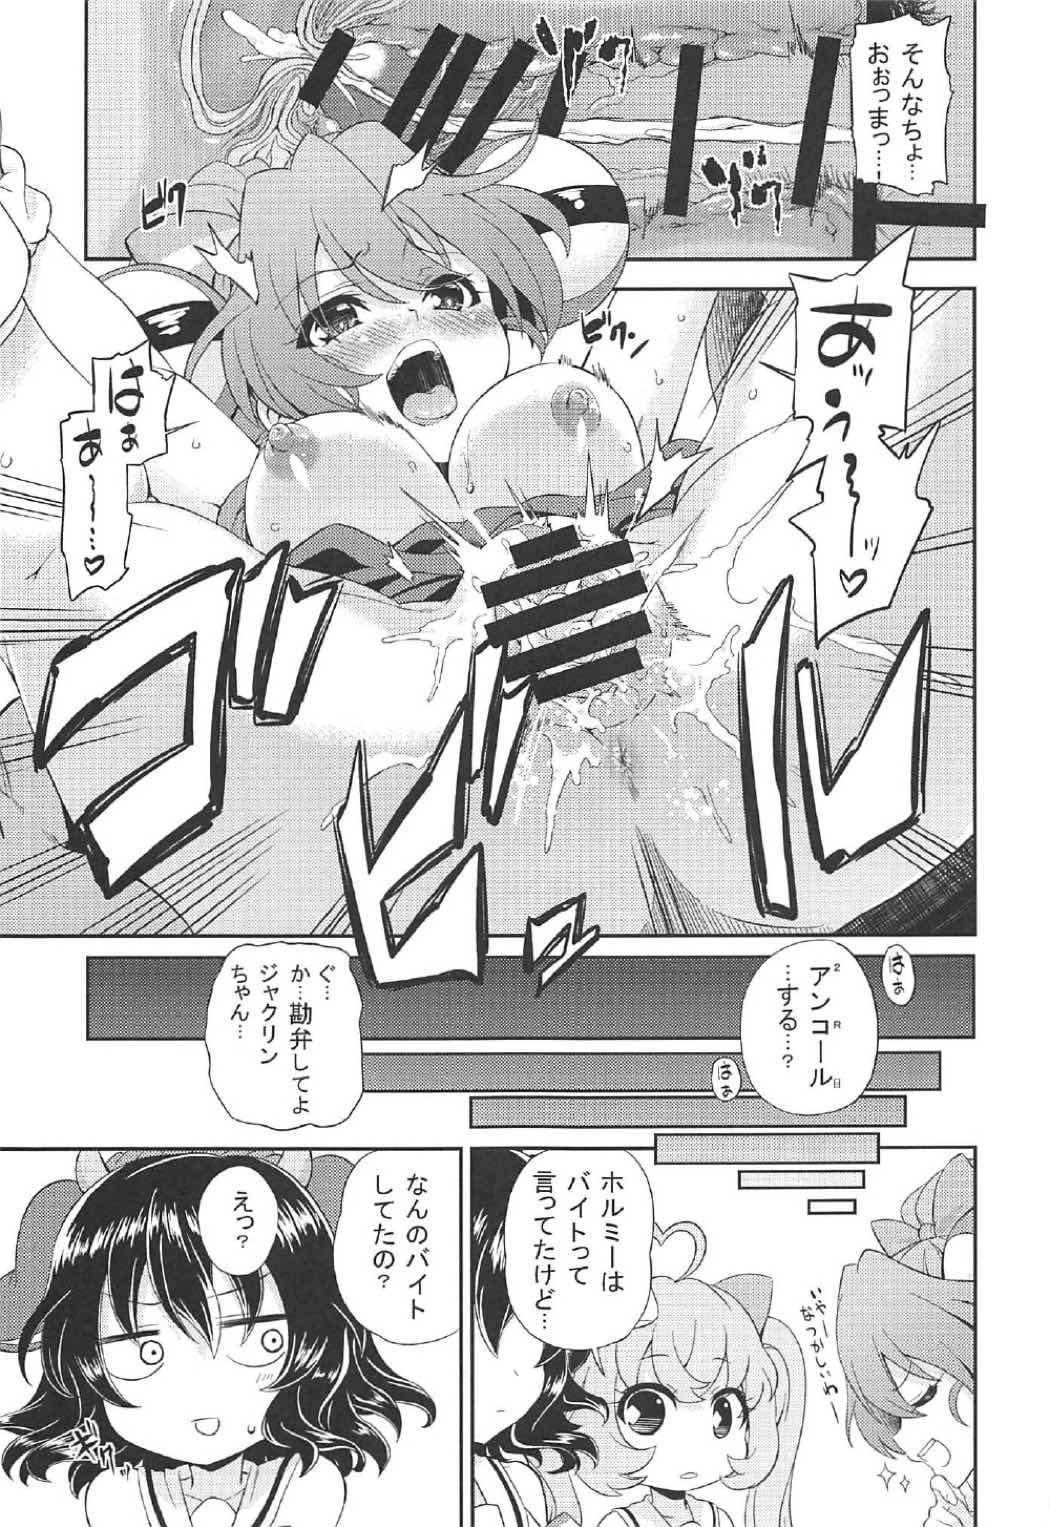 Chick Kuri. - Show by rock Ejaculation - Page 8